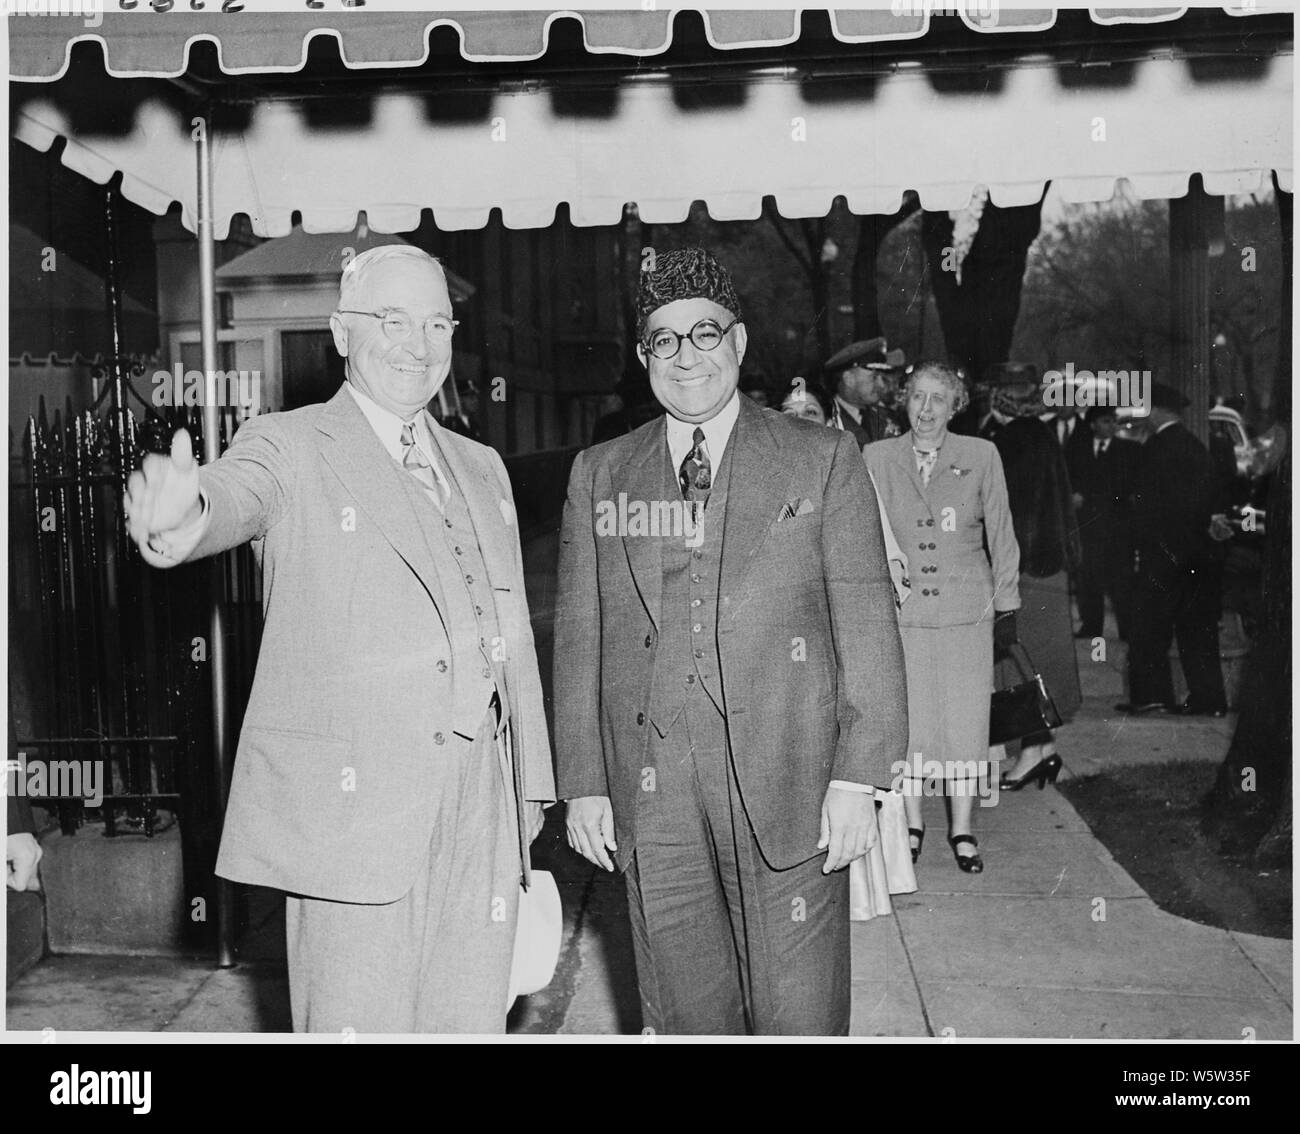 Photograph of President Truman and Prime Minister Liaquat Ali Khan of Pakistan in Washington during the Prime Minister's visit to the United States. Stock Photo